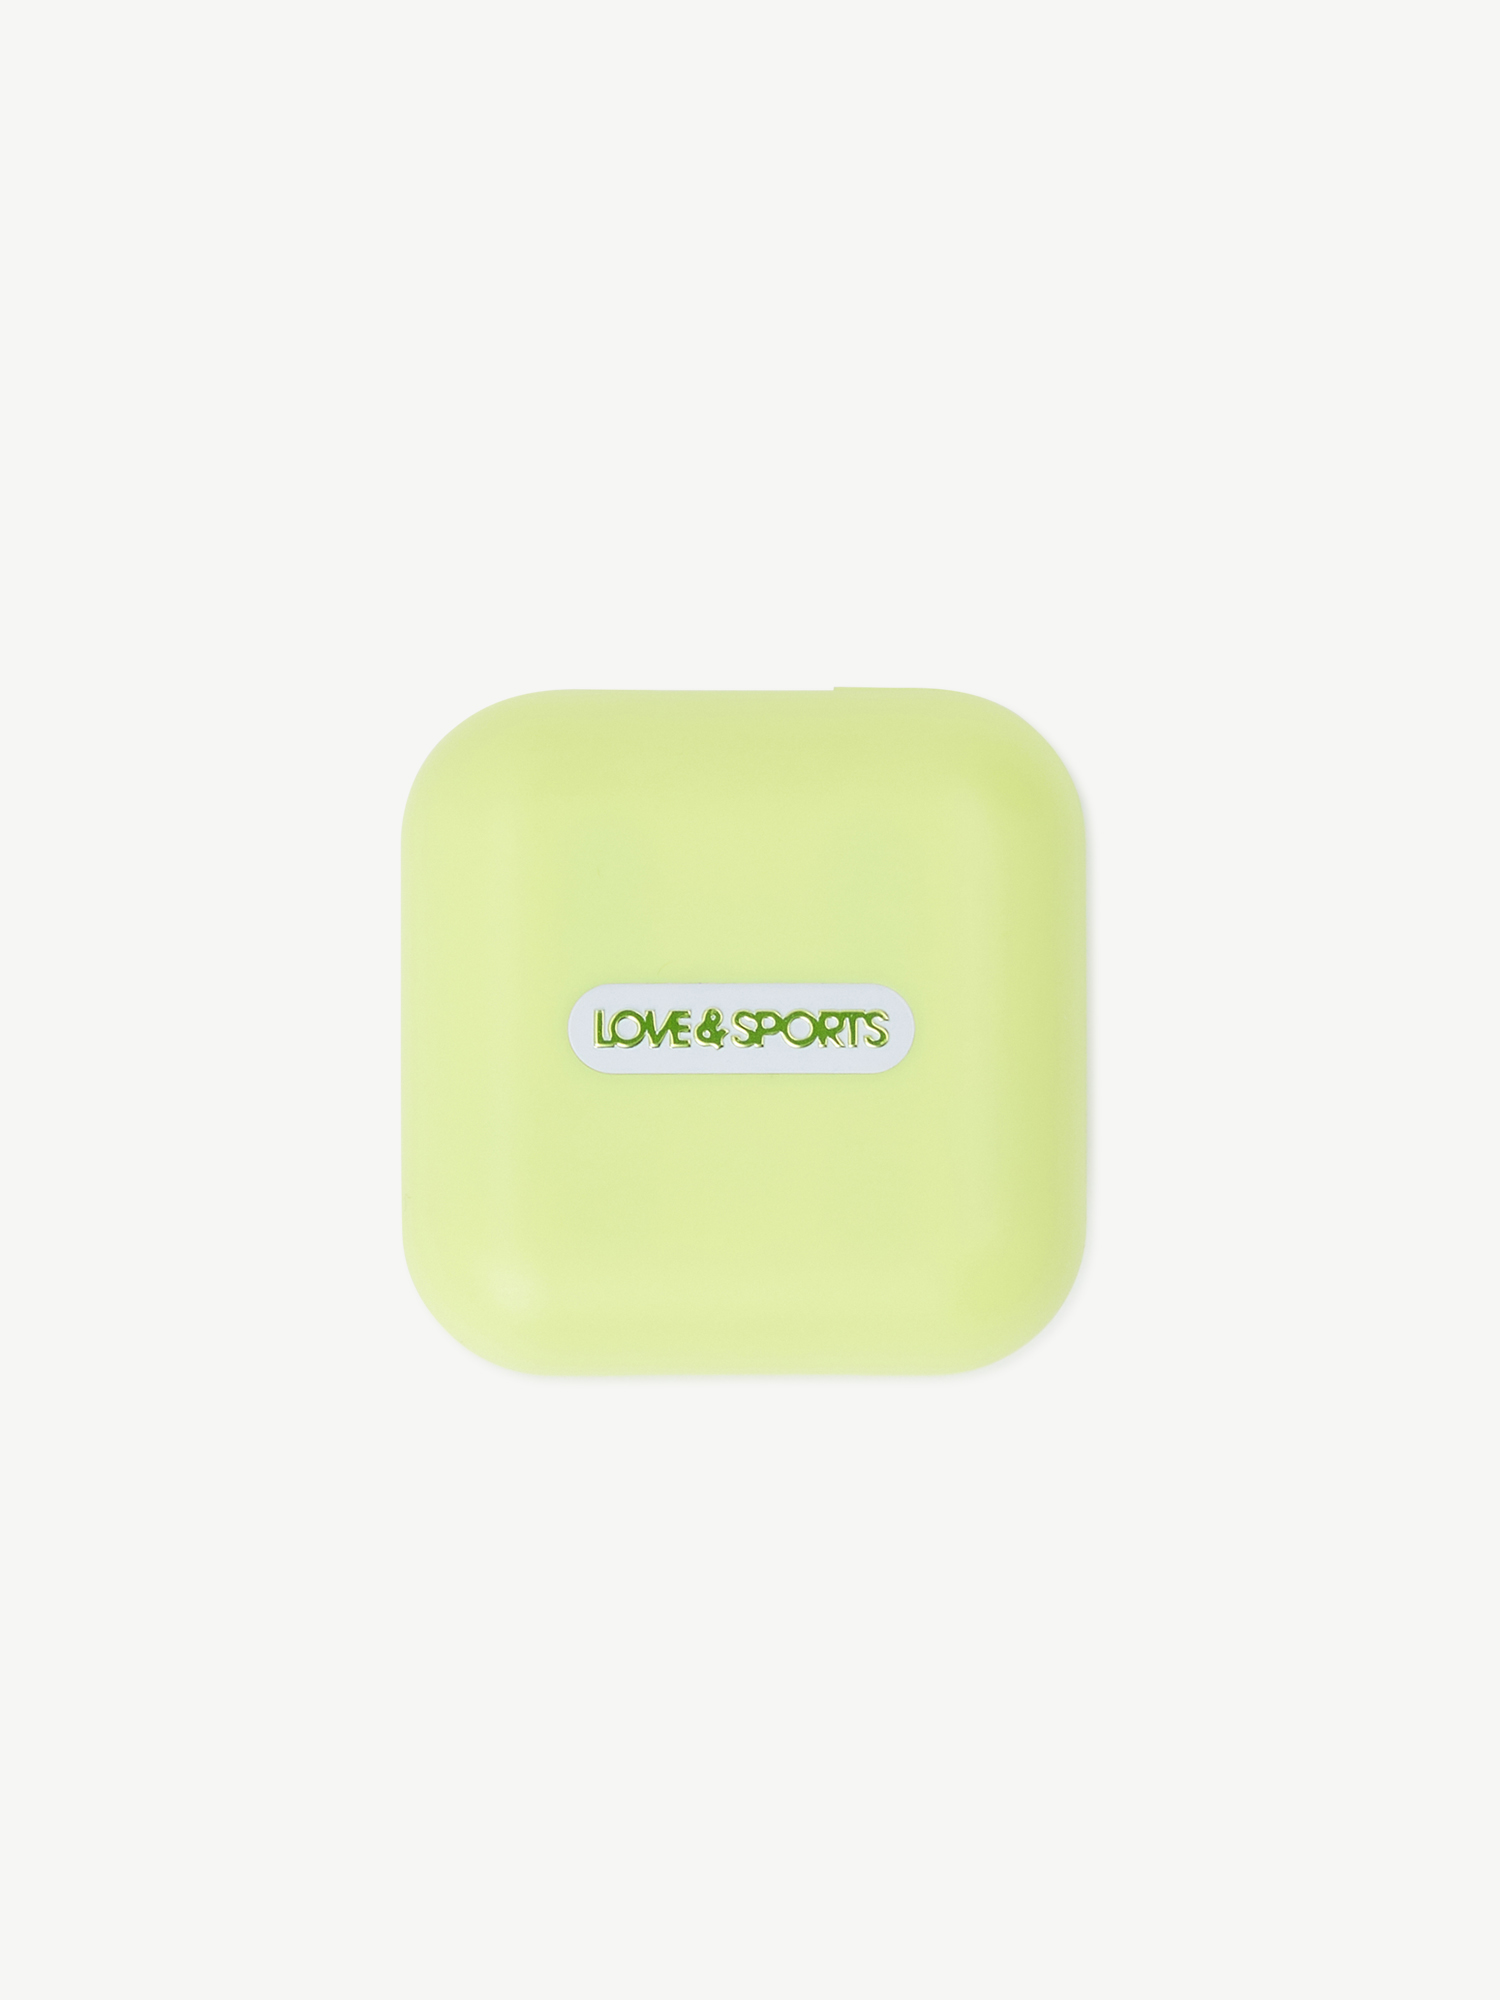 Love & Sports Bluetooth Wireless Earbuds and Charging Case, Neon Lime - image 4 of 5